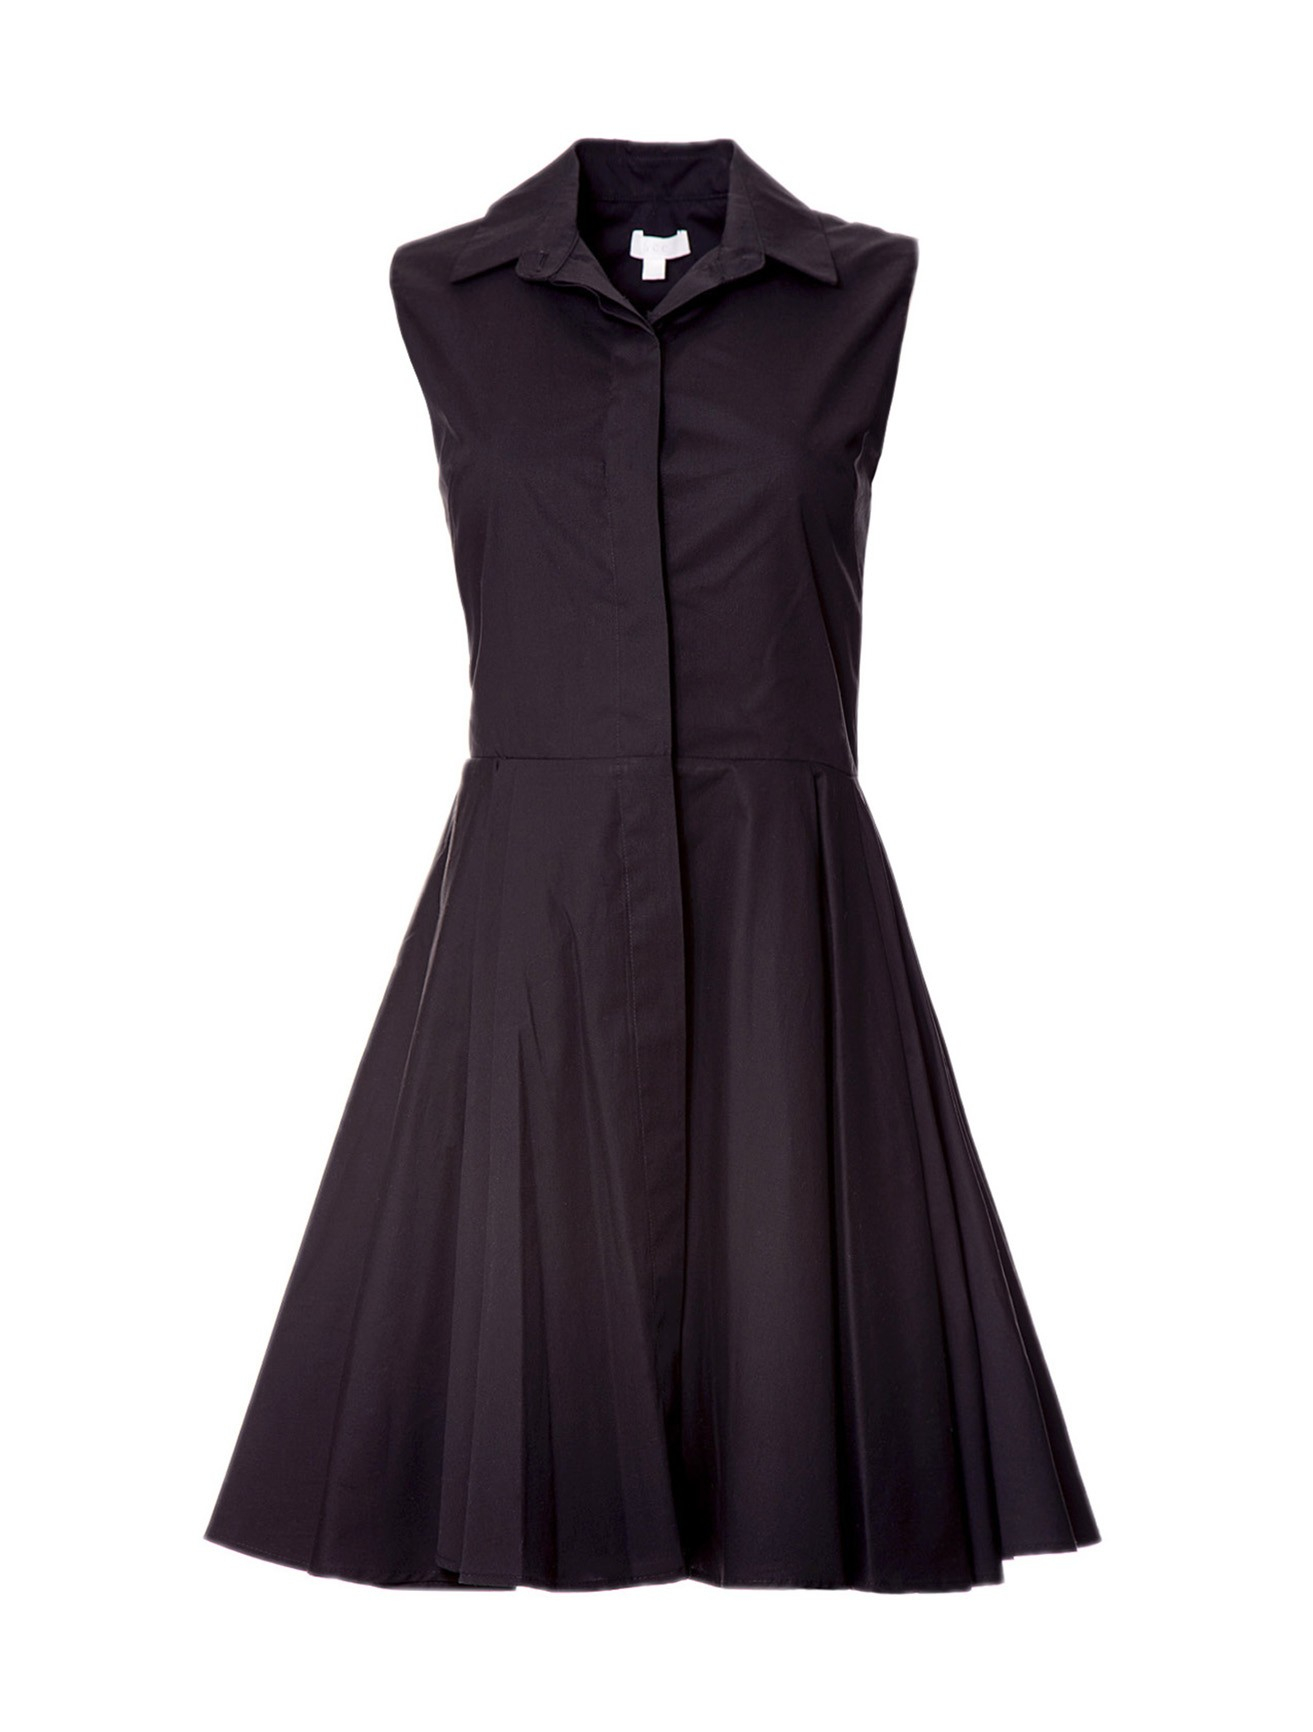 Ace Sleeveless Button-down Dress in Black | Lyst